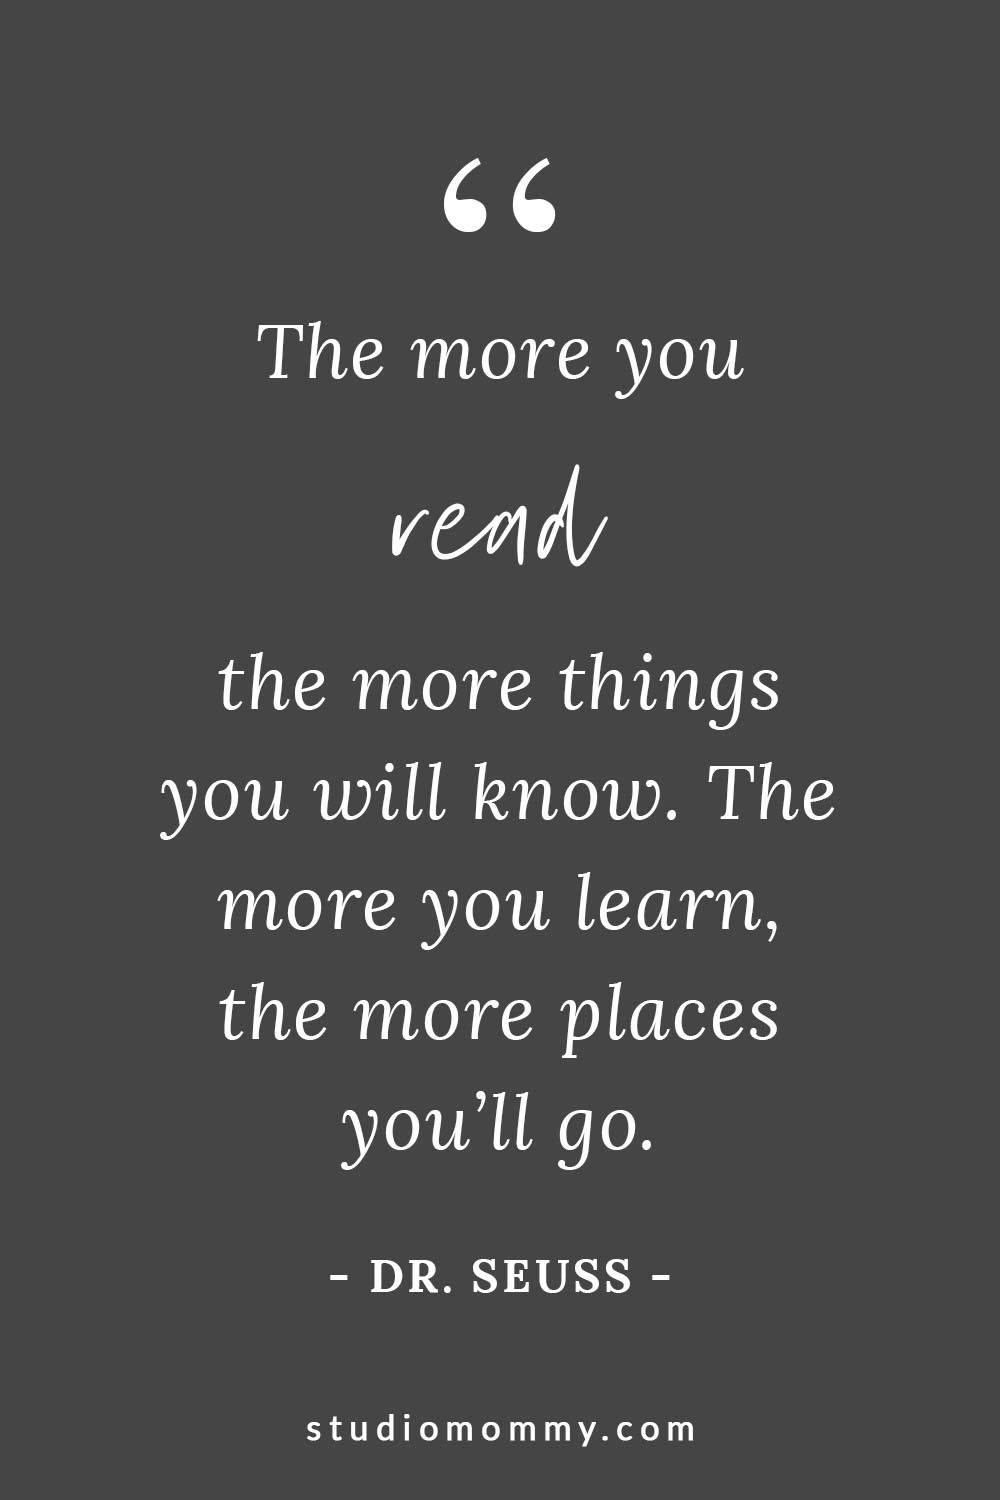 The more you read the more things you will know. The more you learn, the more places you'll go. - Dr. Seuss @studiomommy